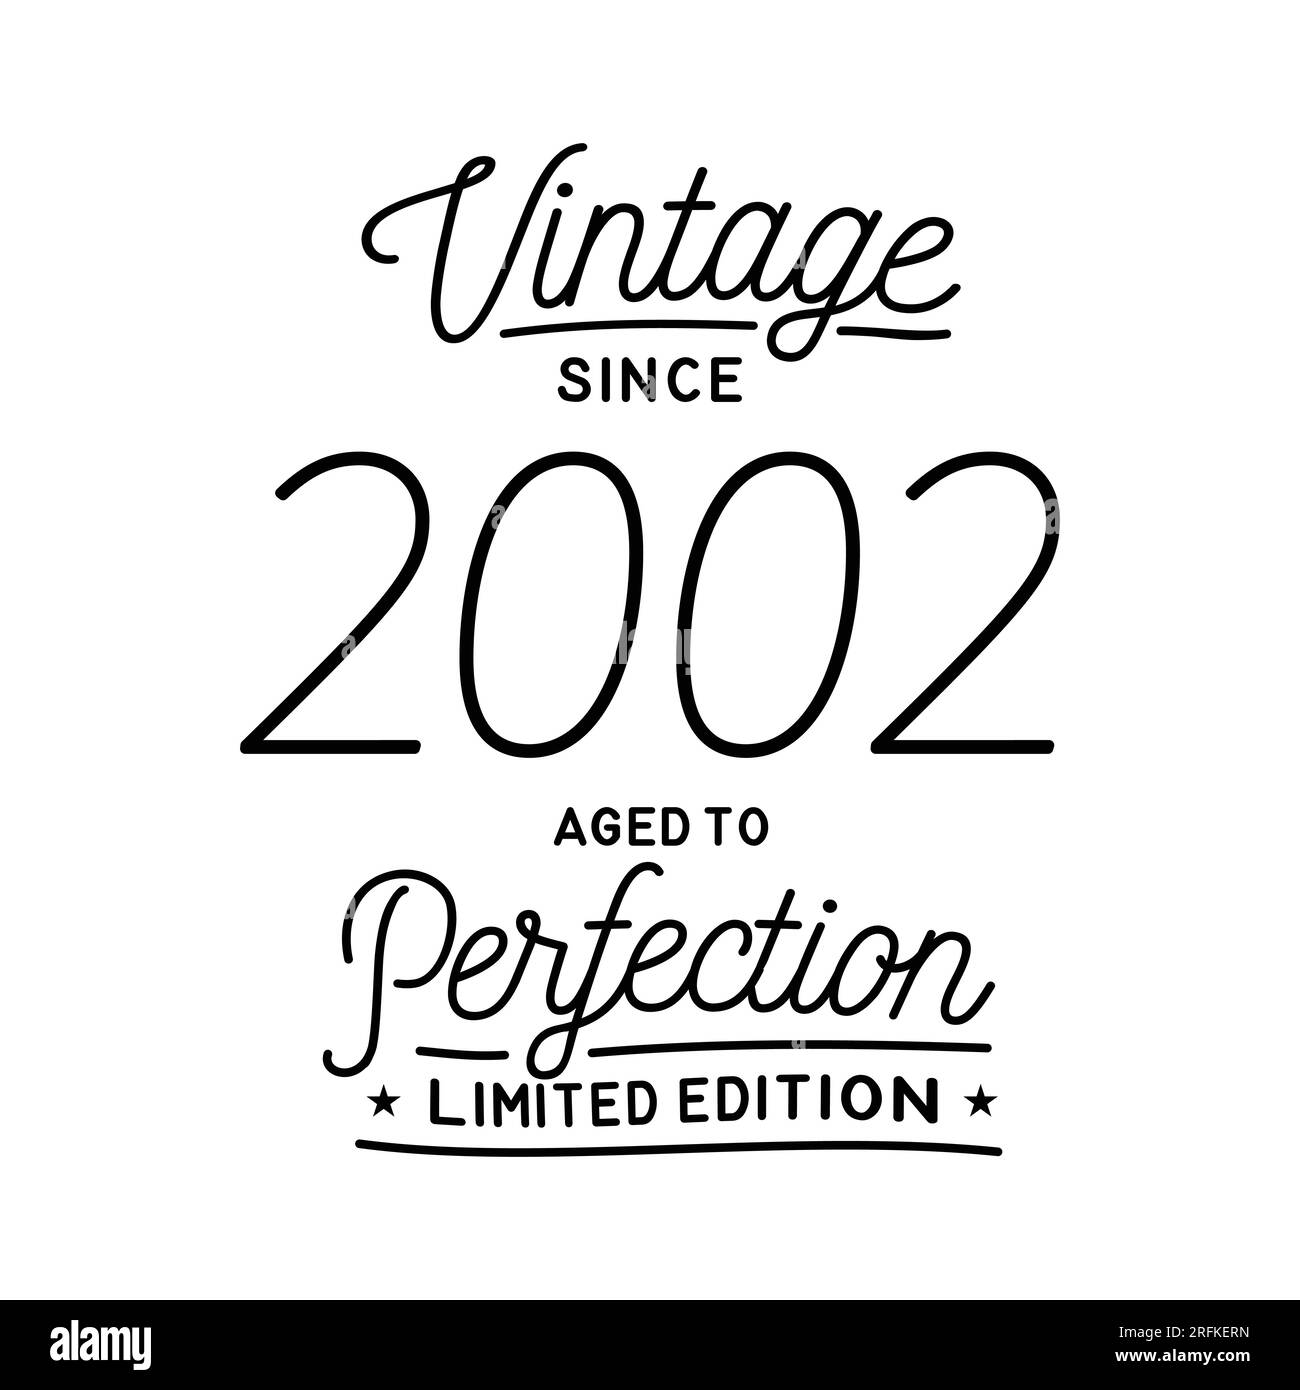 Vintage Since 2002. Aged to perfection. Authentic T-Shirt Design. Vector and Illustration Stock Vector